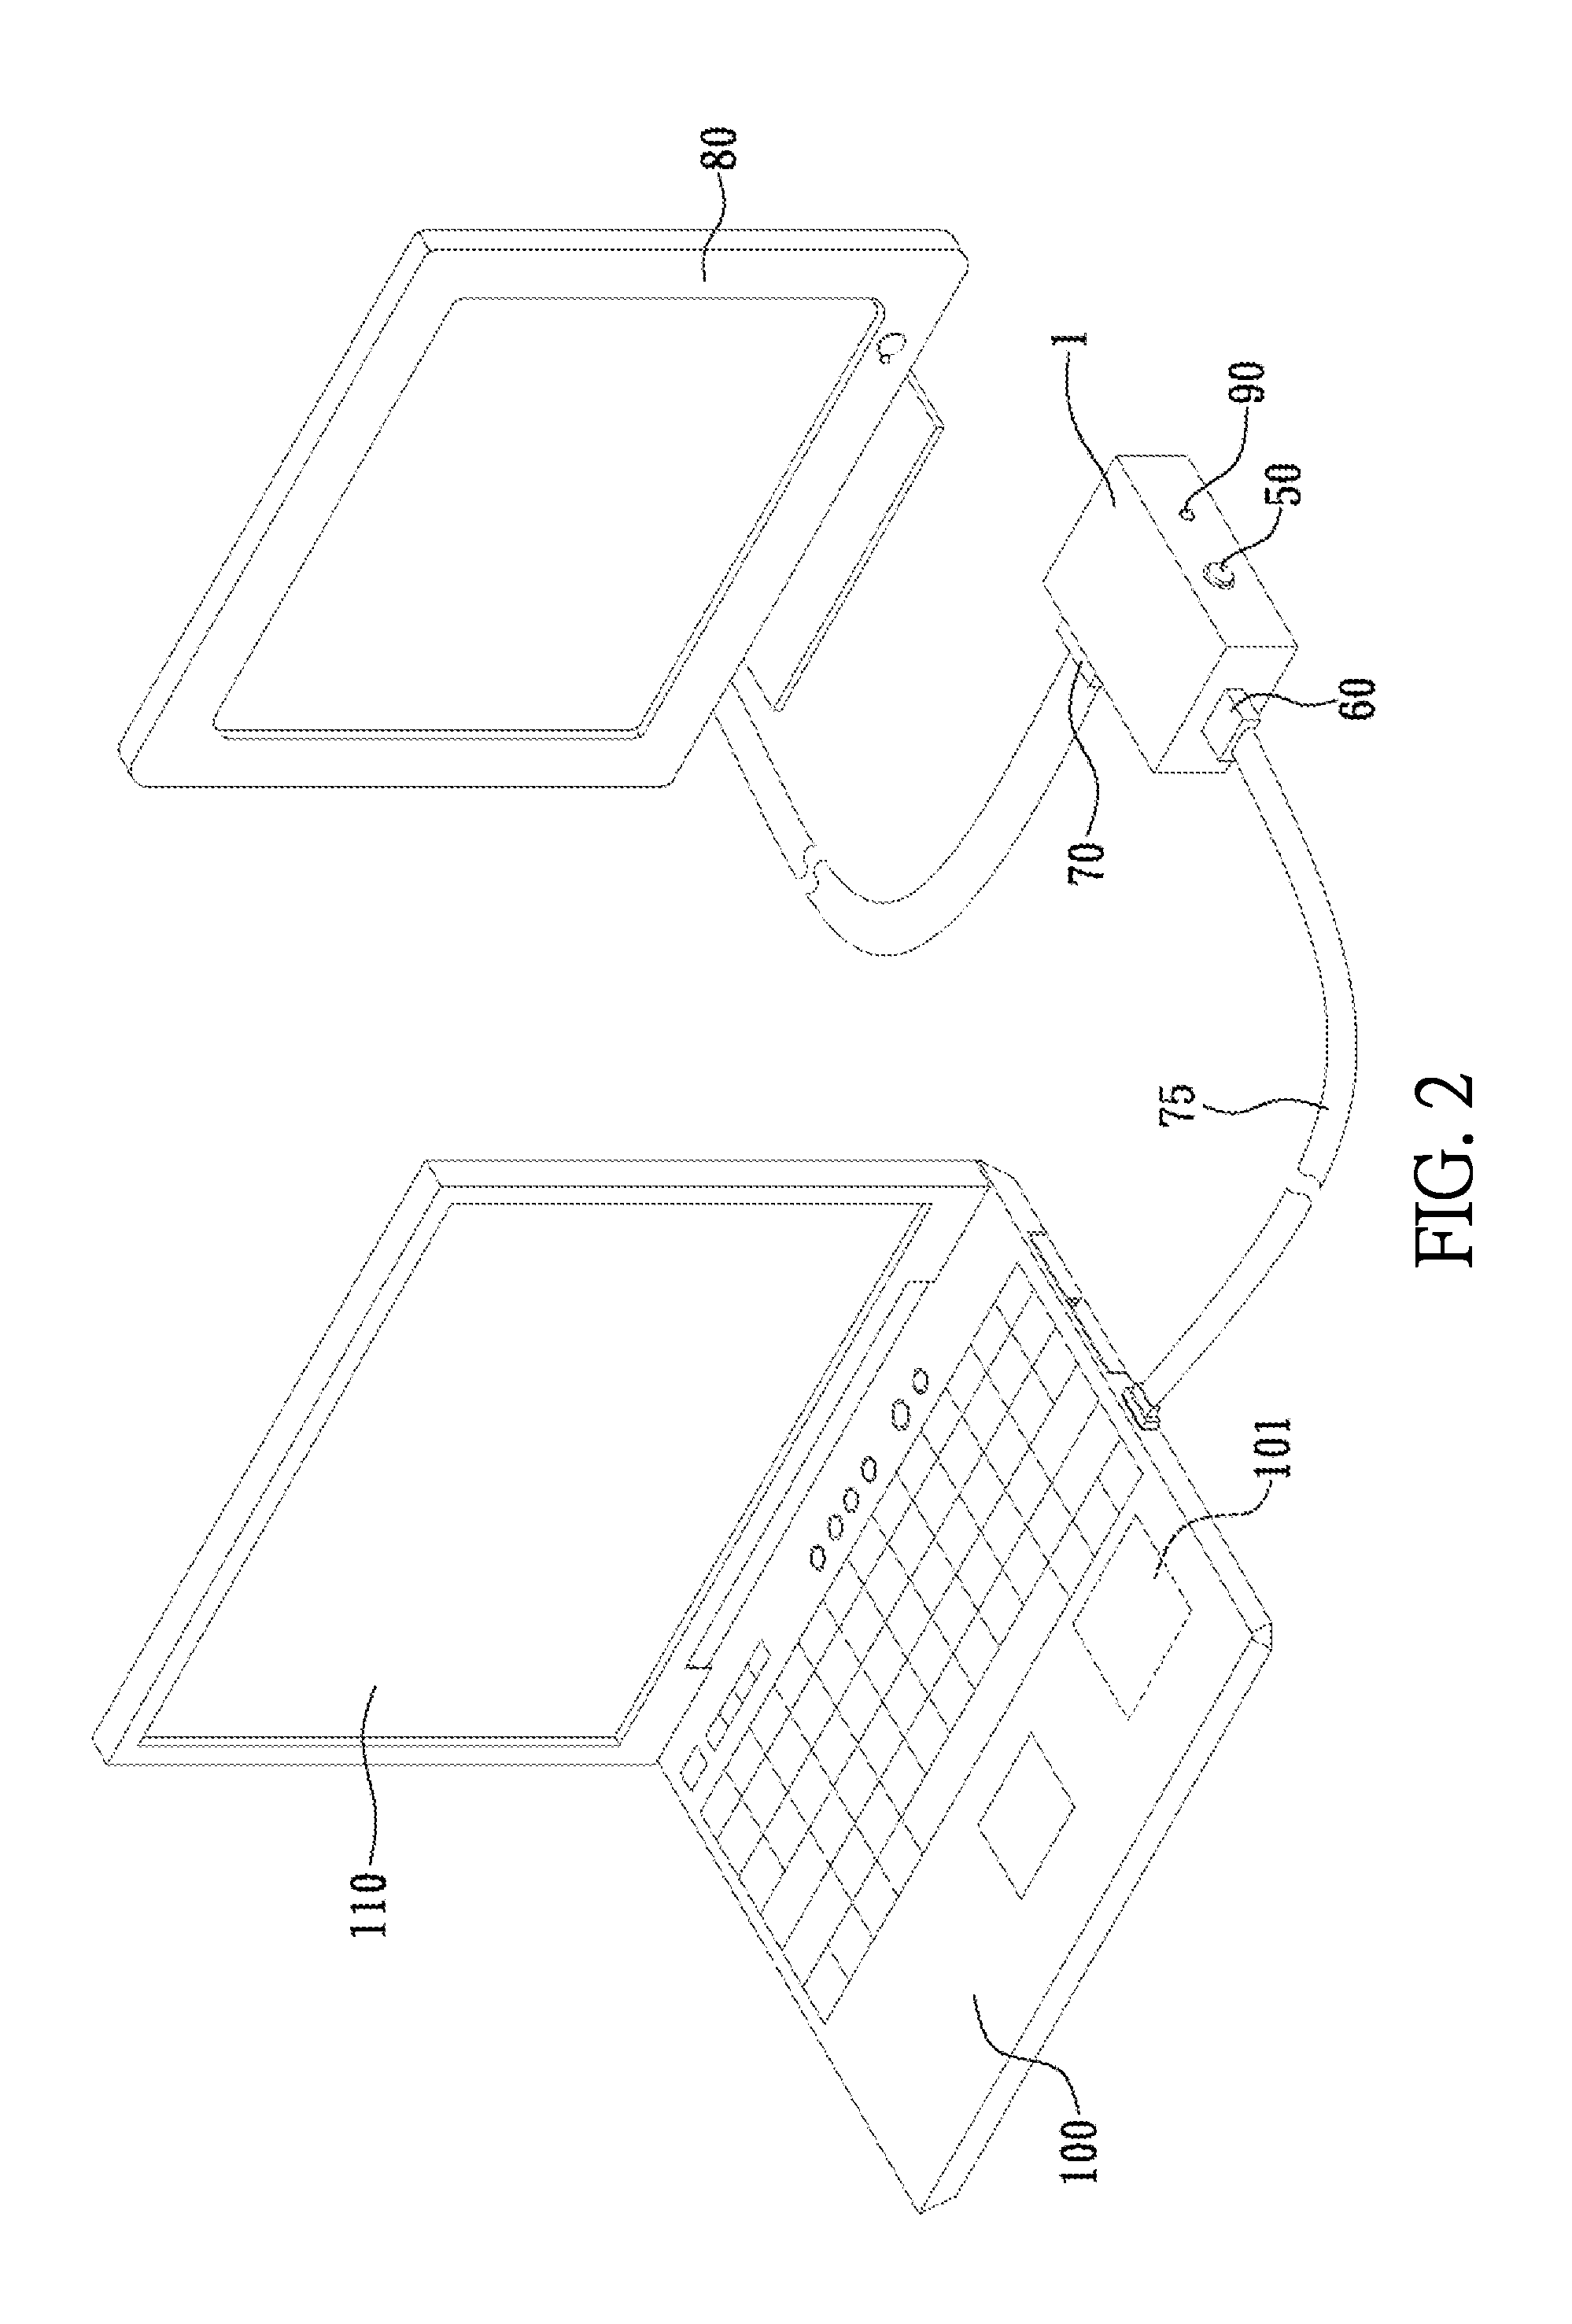 Docking Station with Video Control System